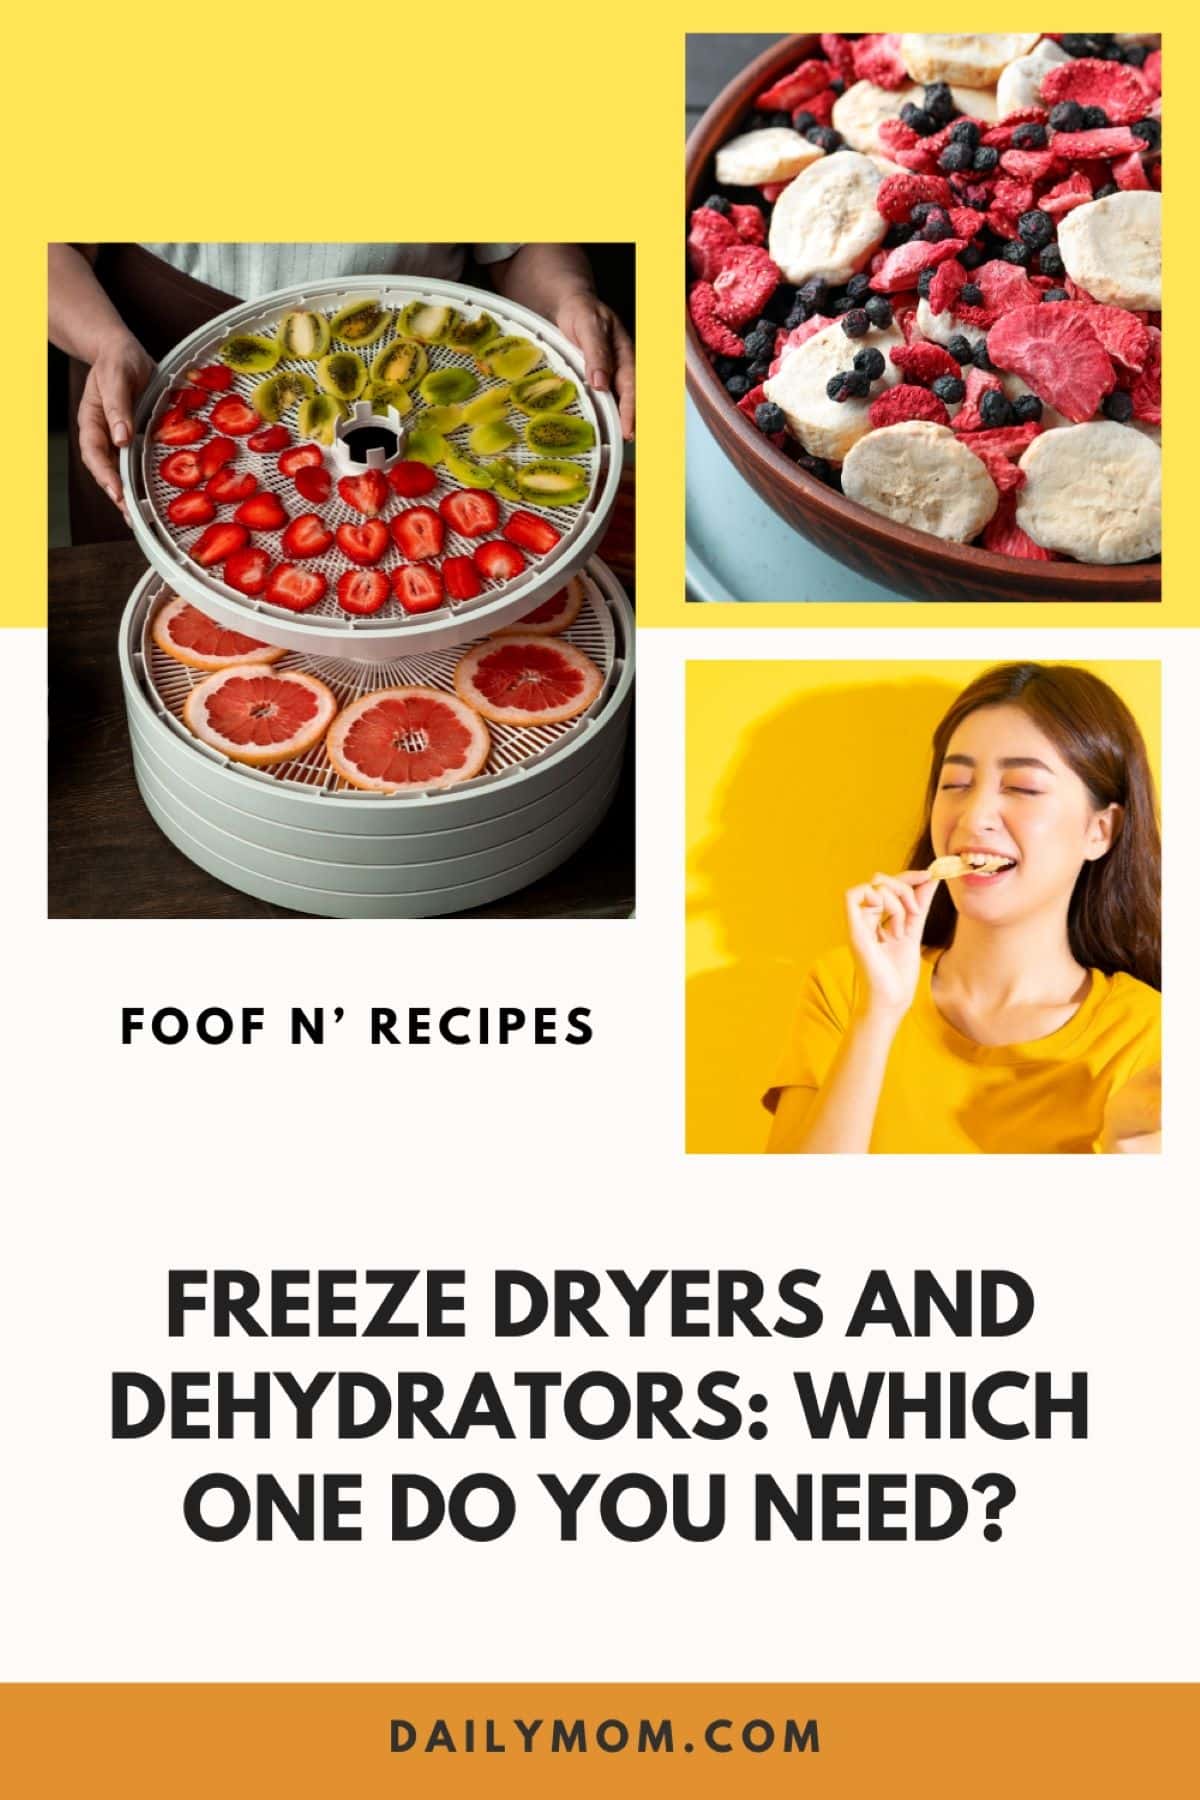 The Ultimate Guide to Home Food Preservation and Processing: Freeze Dried Food vs. Dehydrating - the Best Way to Preserve Food at Home 5 Daily Mom, Magazine for Families